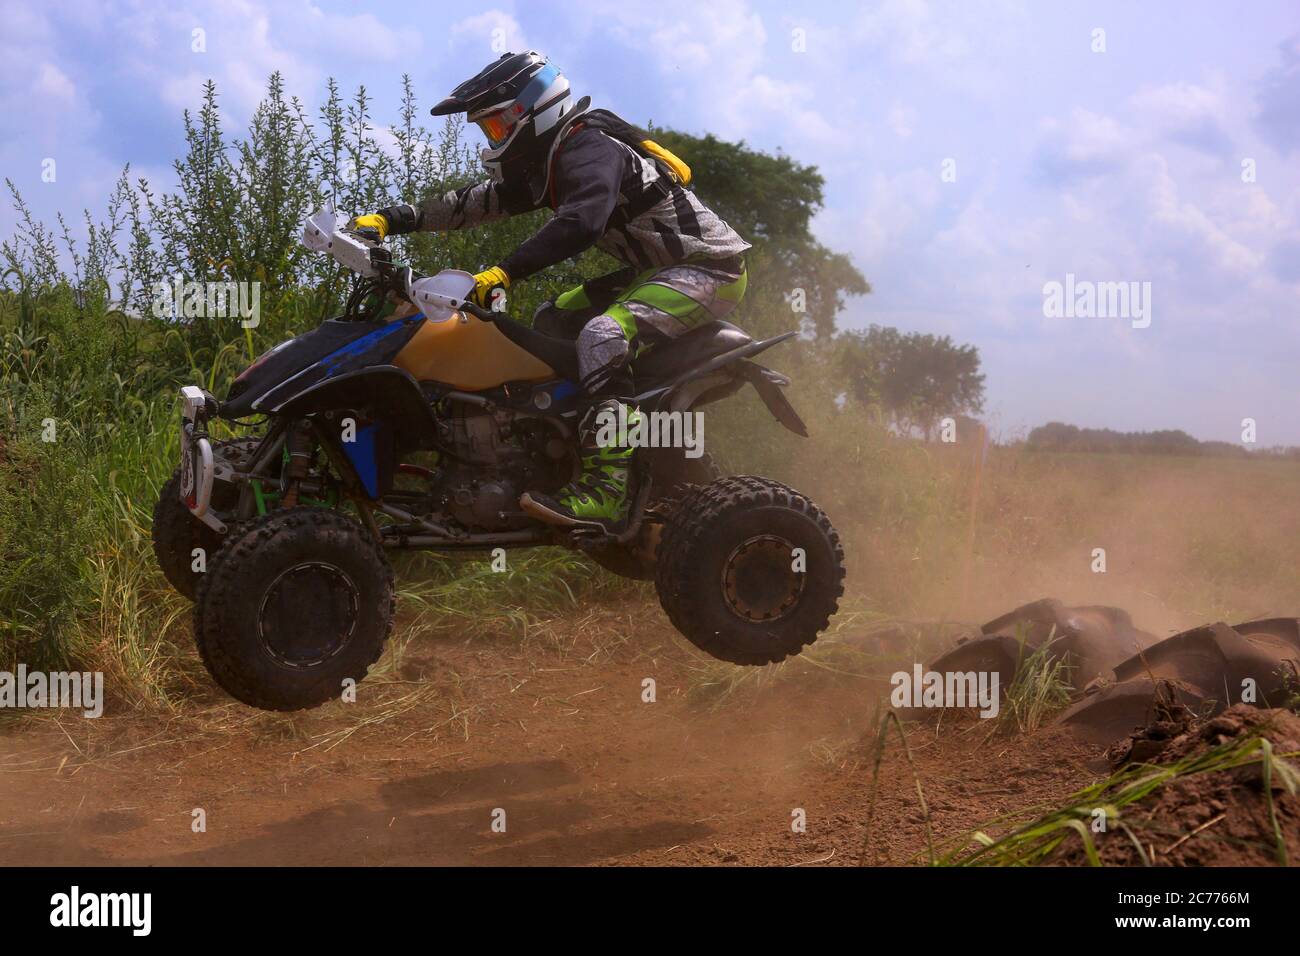 An ATV rider catches some air off of a jump during a weekend ride. Stock Photo